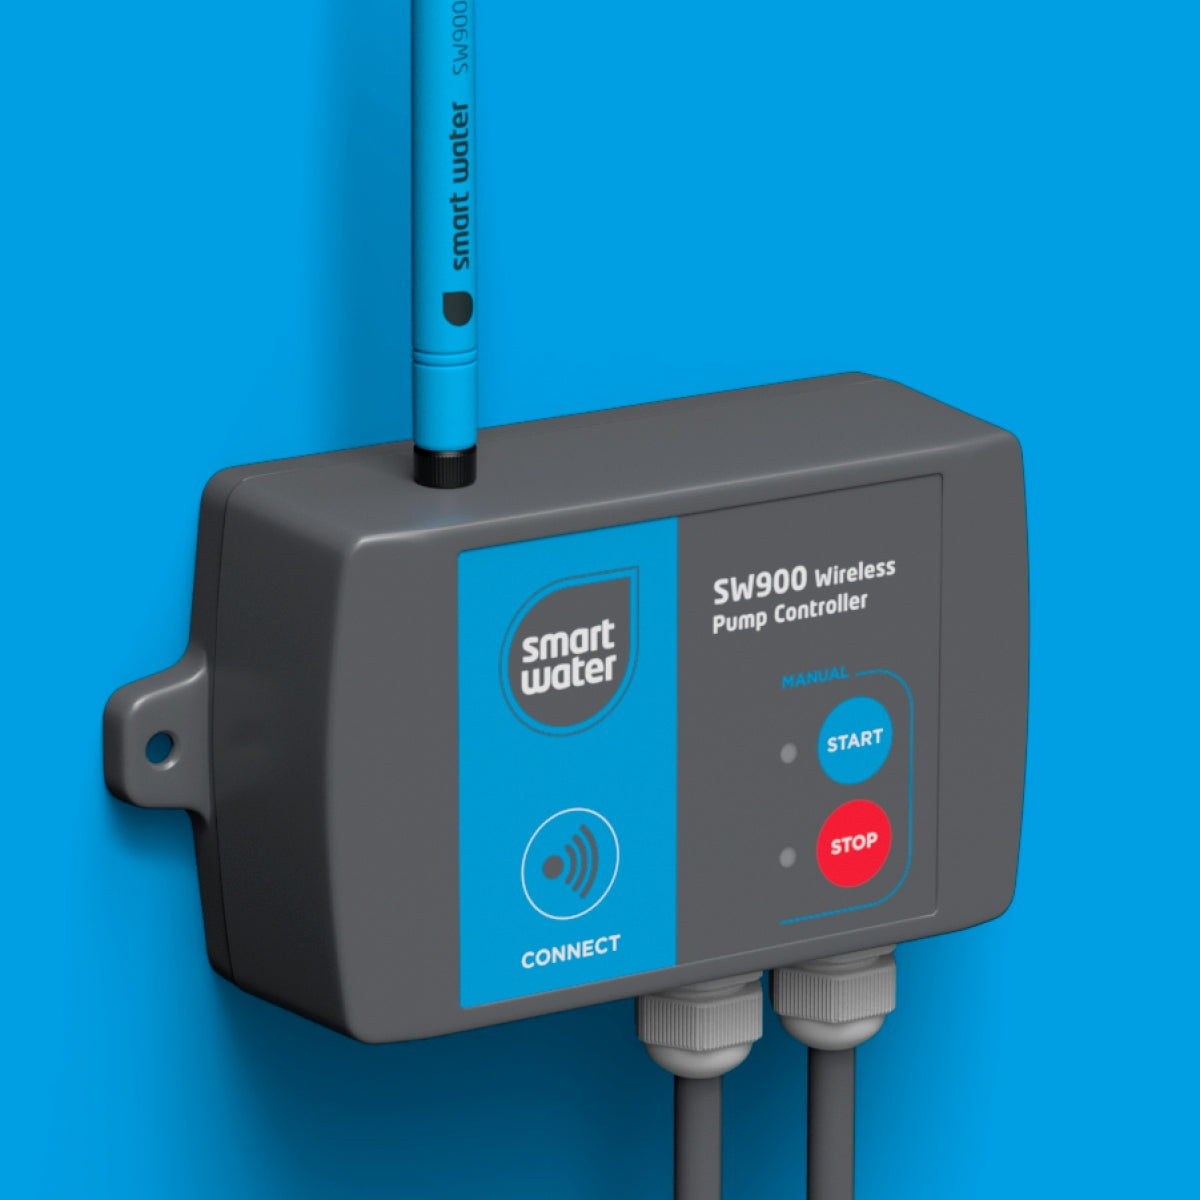 Smart Water SW900-PUMP-C/O - Wireless Pump Controller - 12VDC Change Over Version - Tech Supply Shed